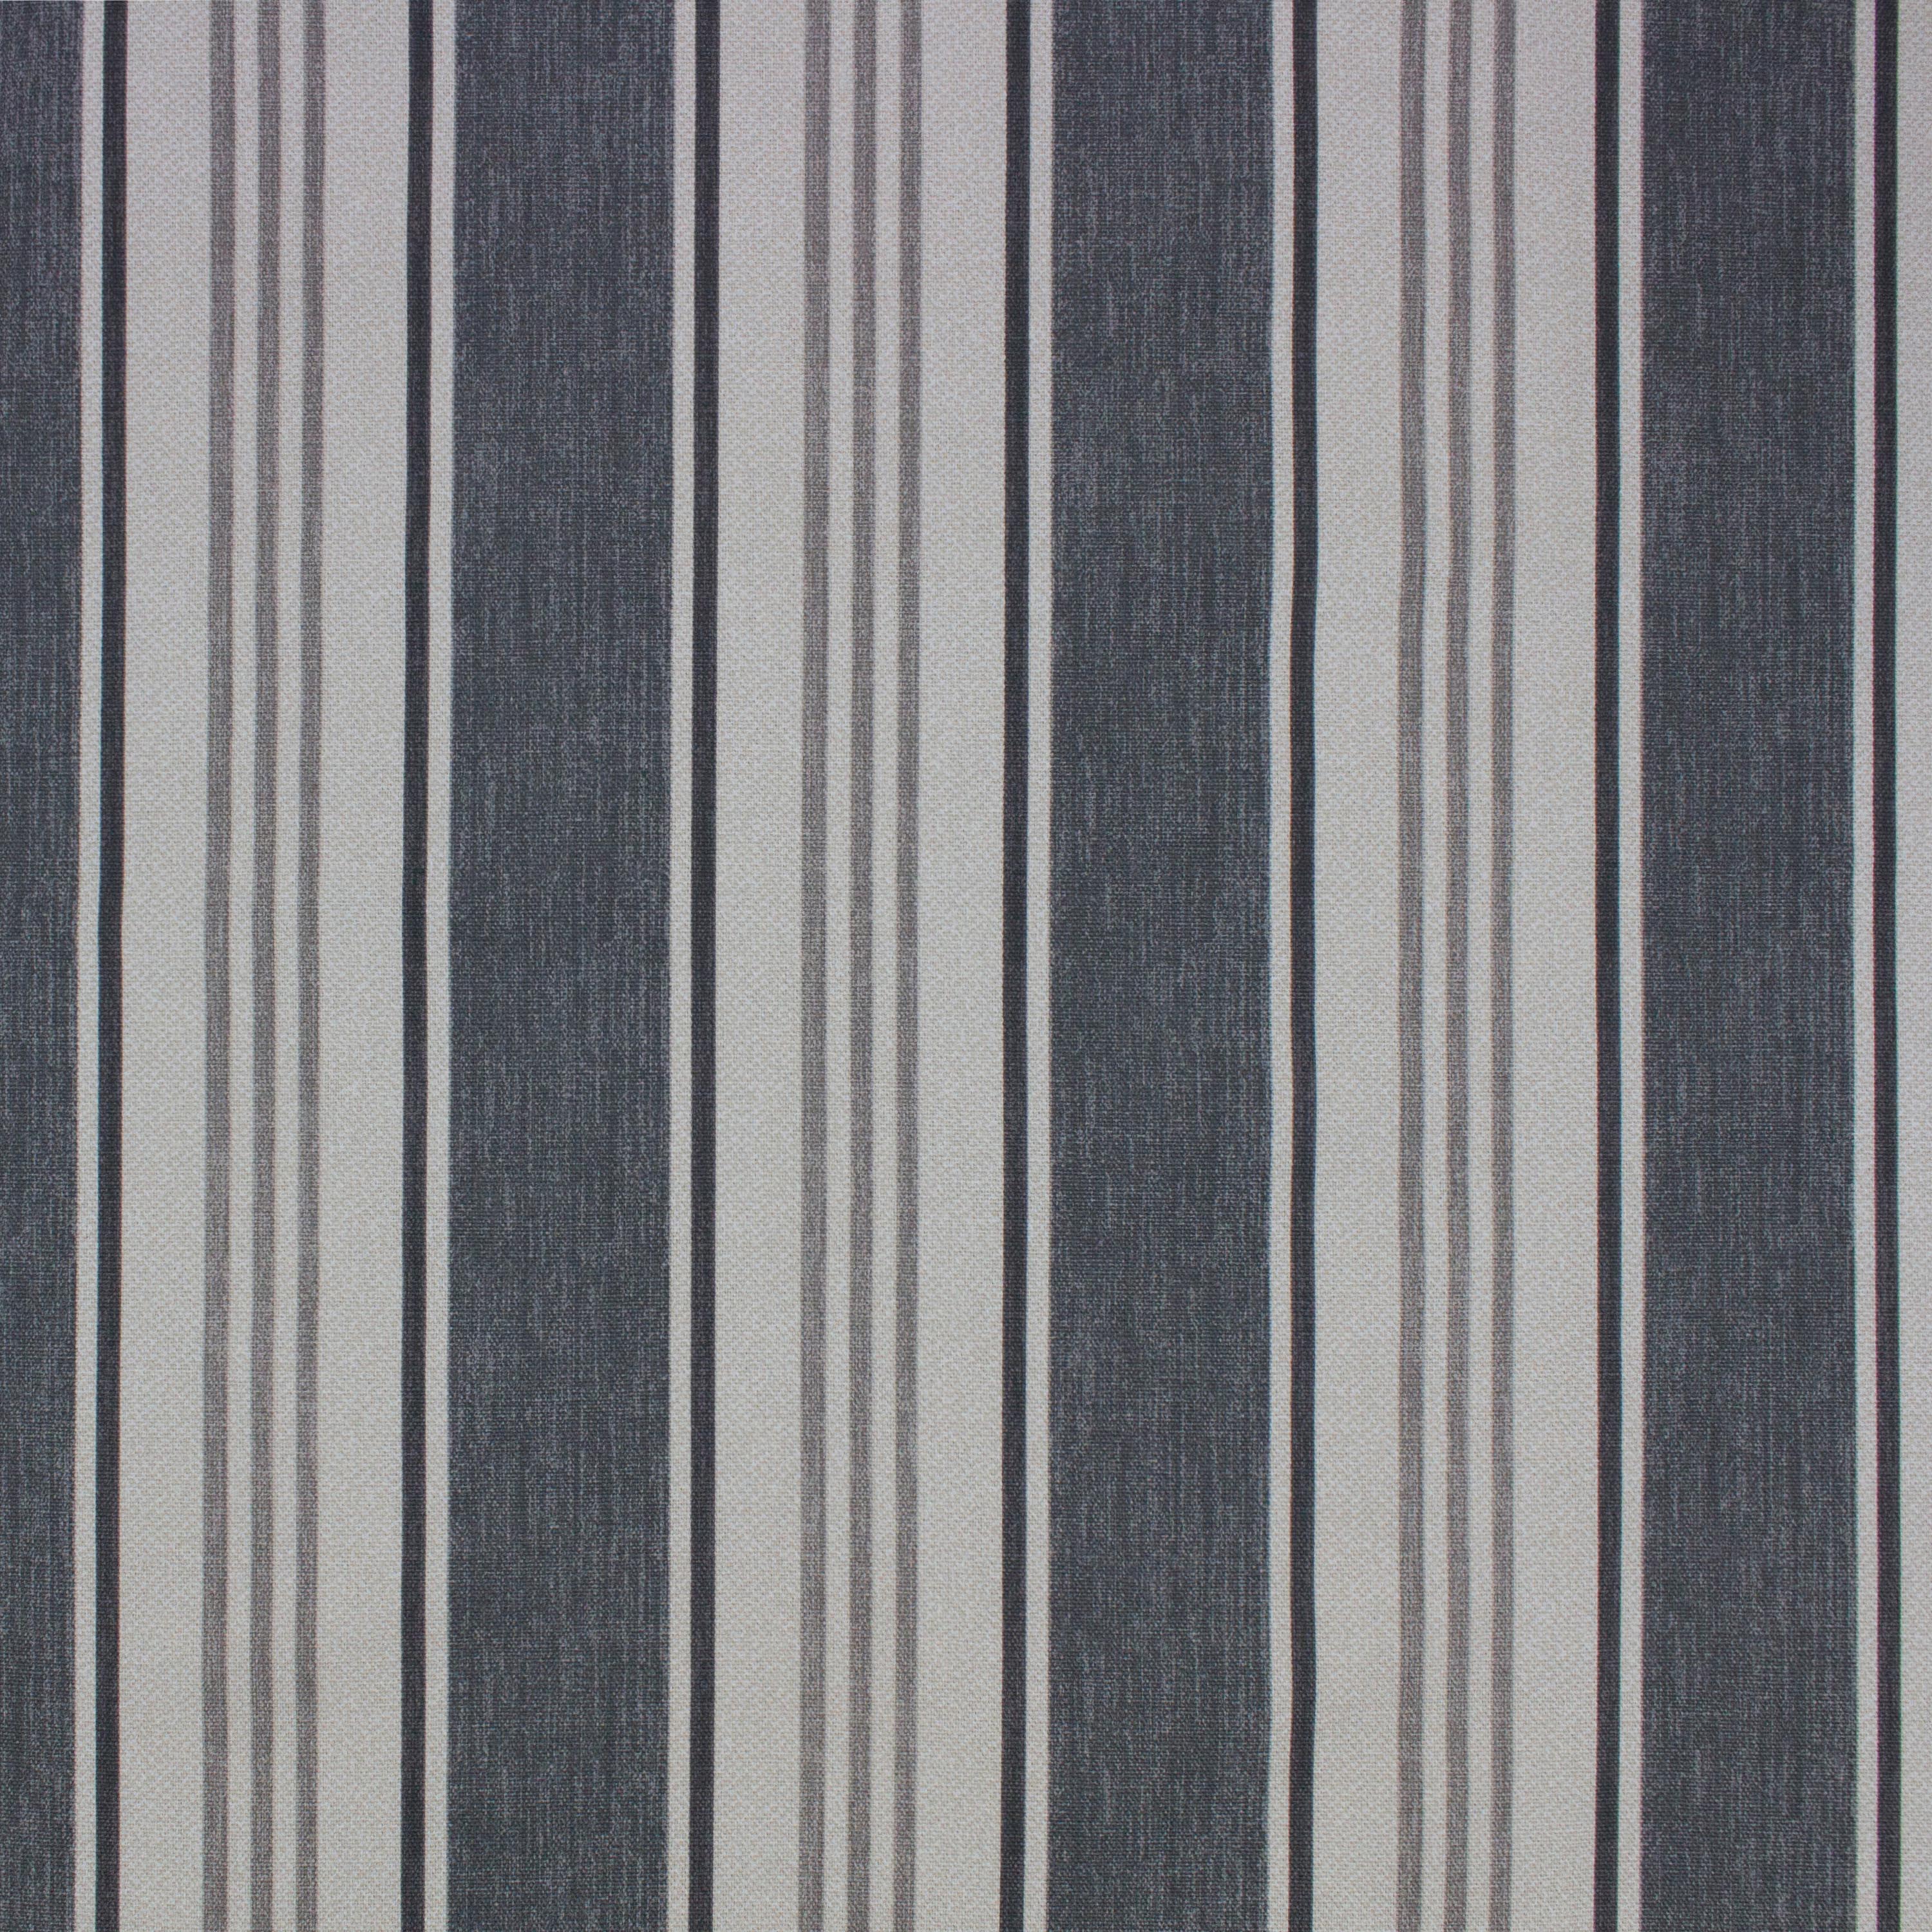 Better Homes & Gardens Wide Stripe Color Black 8 Yards by the Bolt 100%  Cotton 54 Width Fabric 